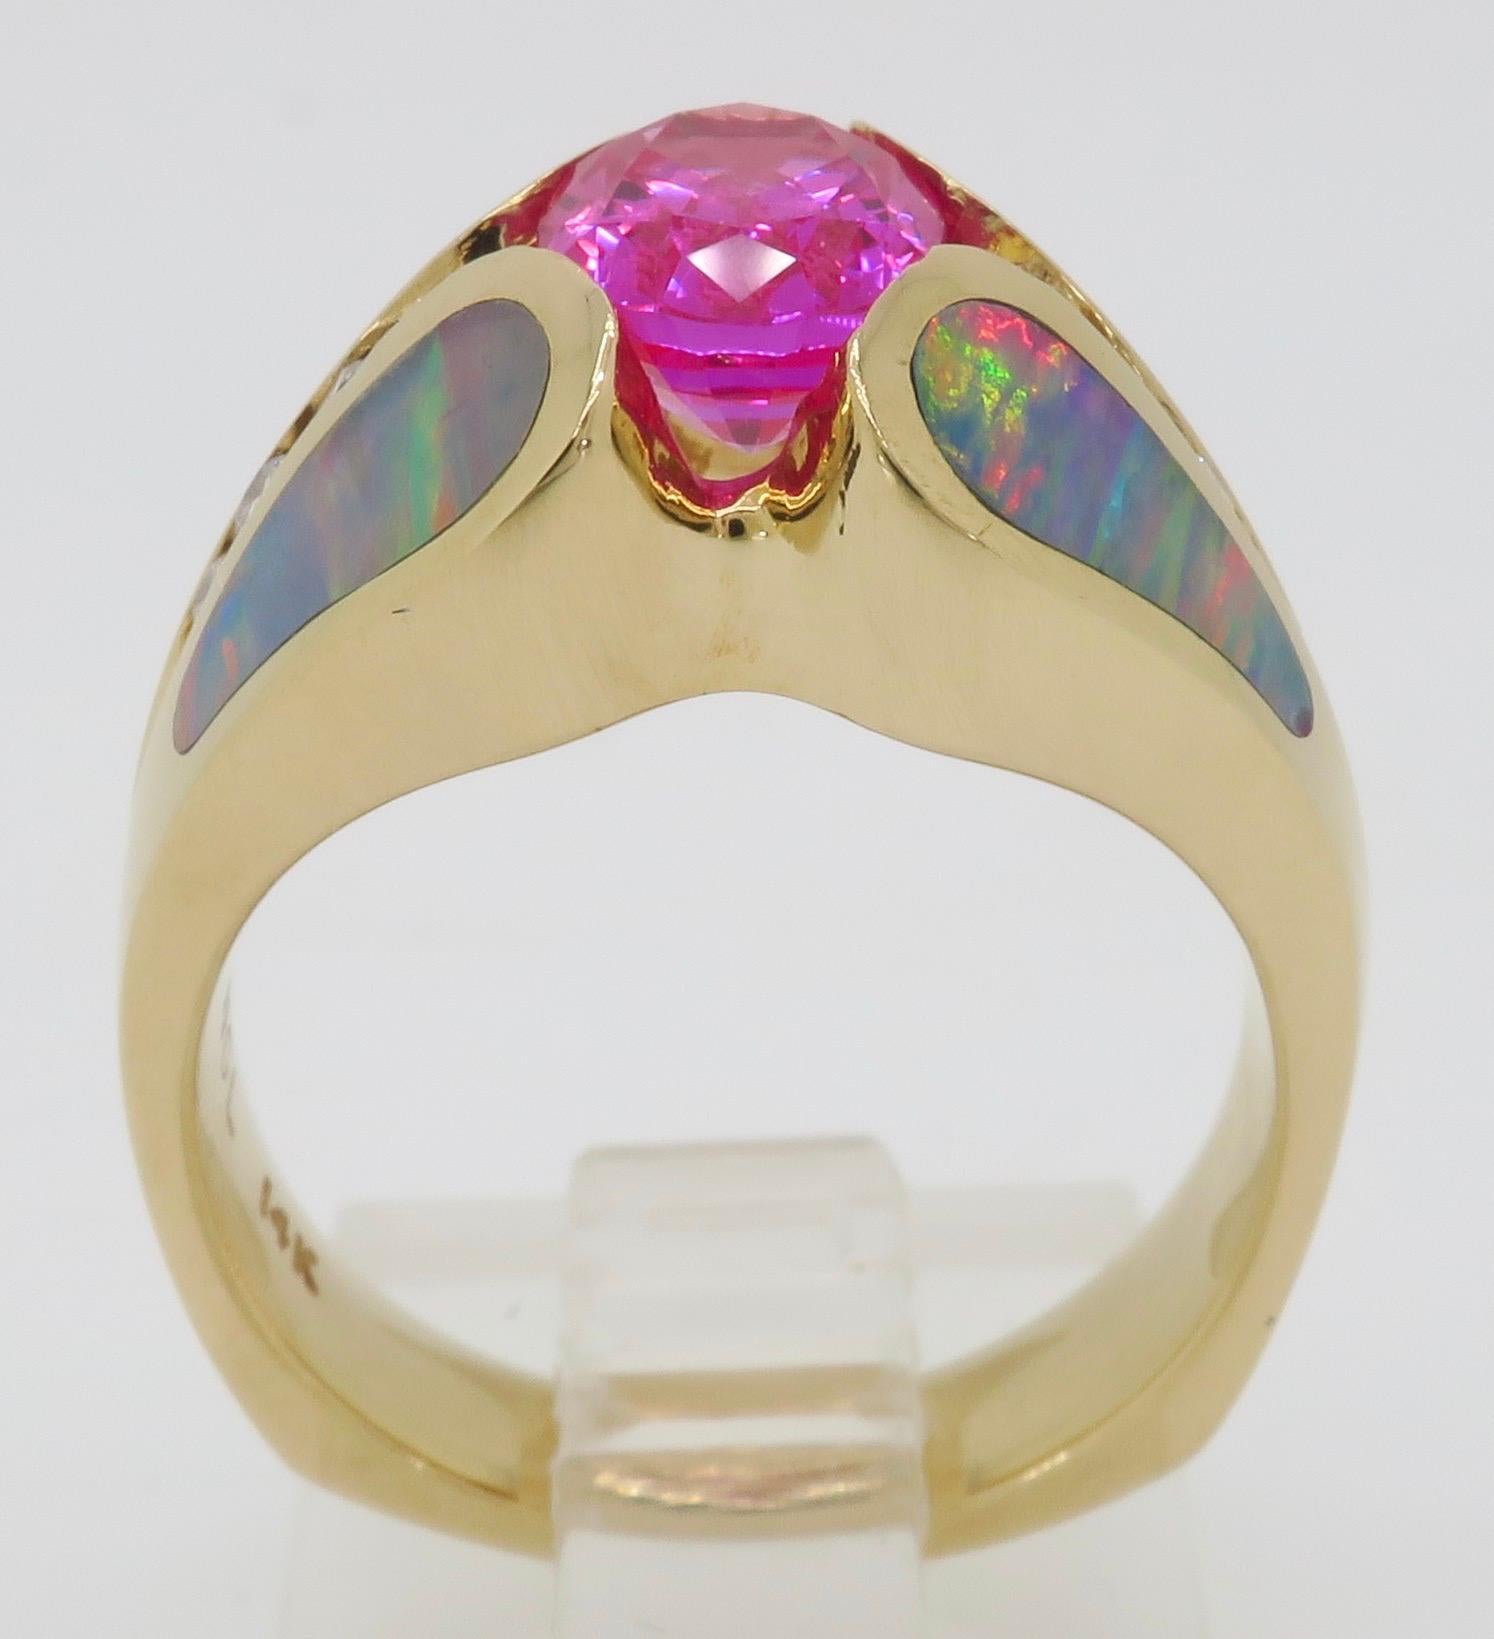 Pink Sapphire Diamond and Opal Ring Made in 14 Karat Yellow Gold 5